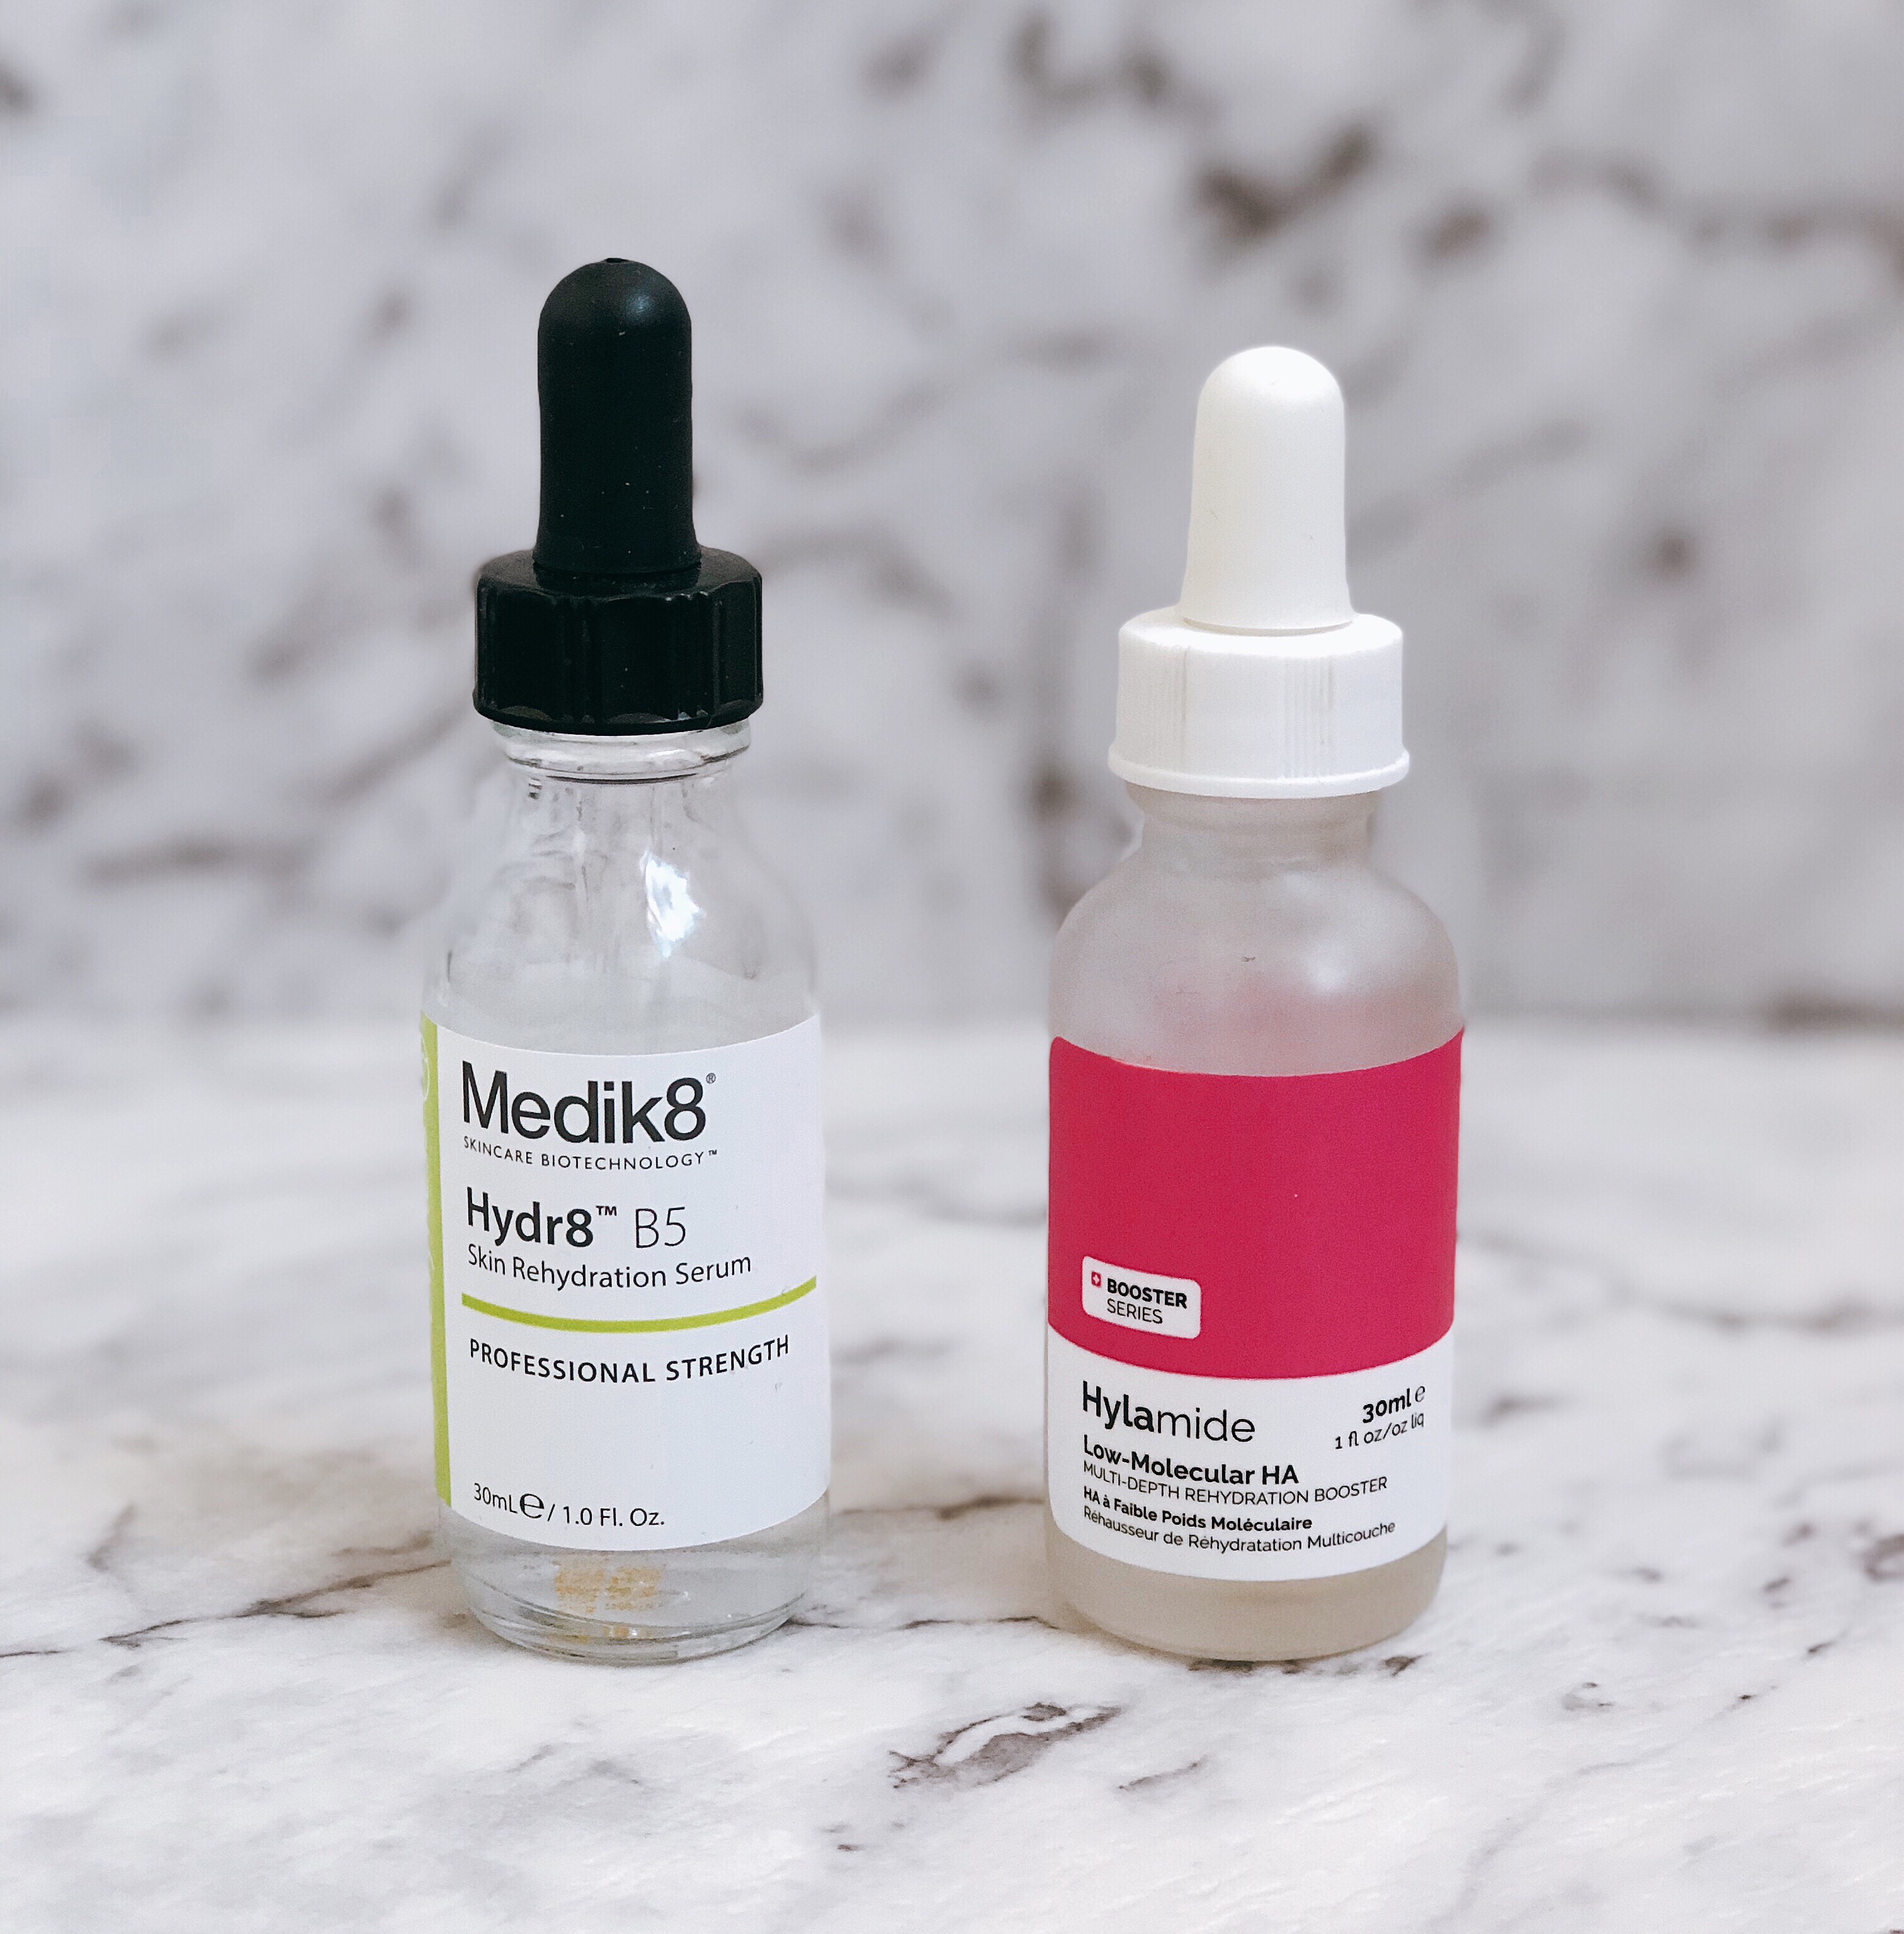 Dupe off – Hydration Serum Edition